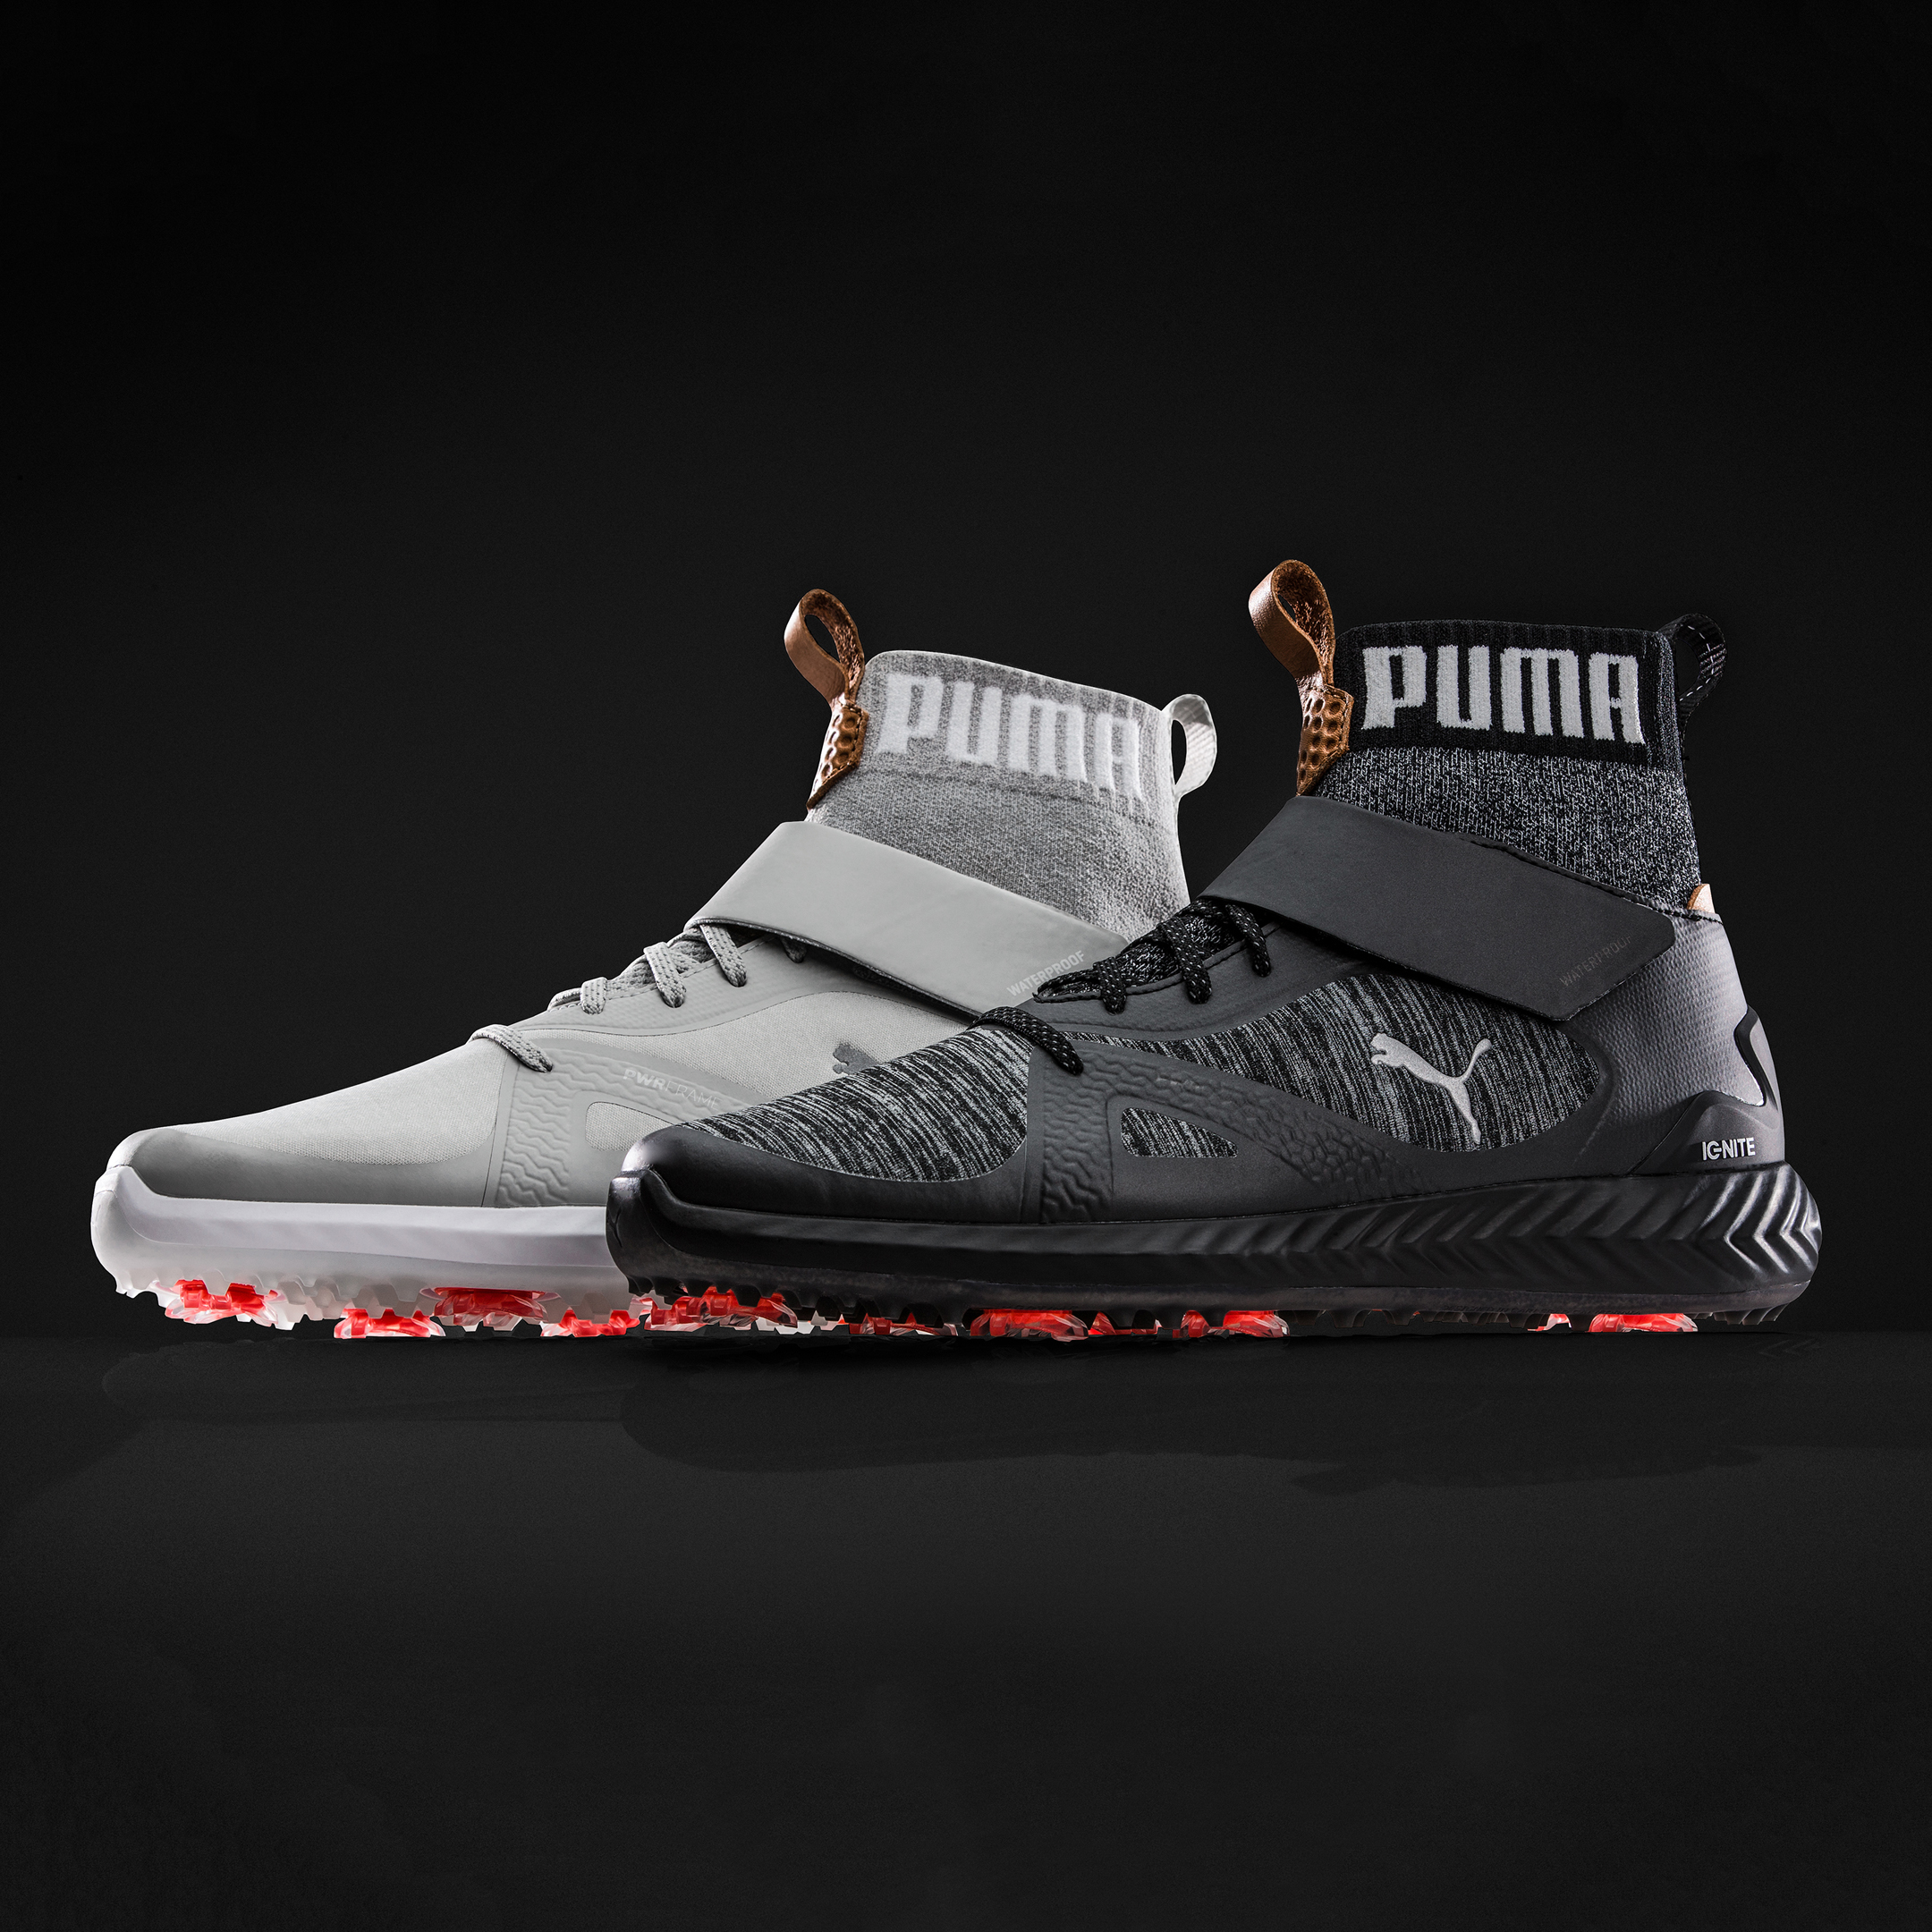 Puma's new high-tops reach new heights in golf shoe style, comfort ...